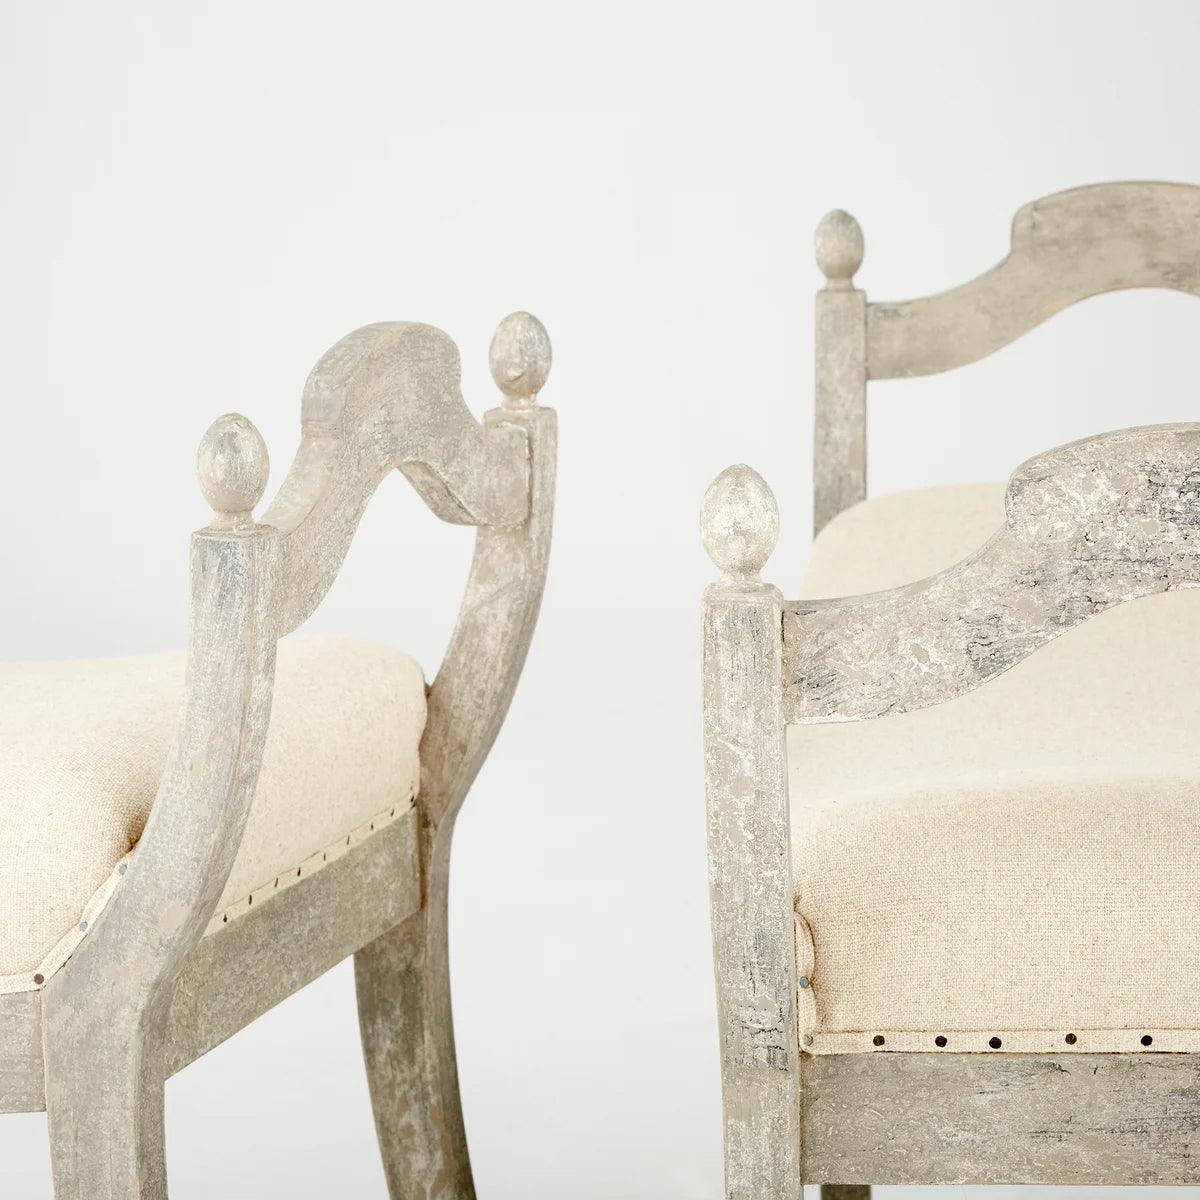 Weathered Grey Curved Bench - Belle Escape